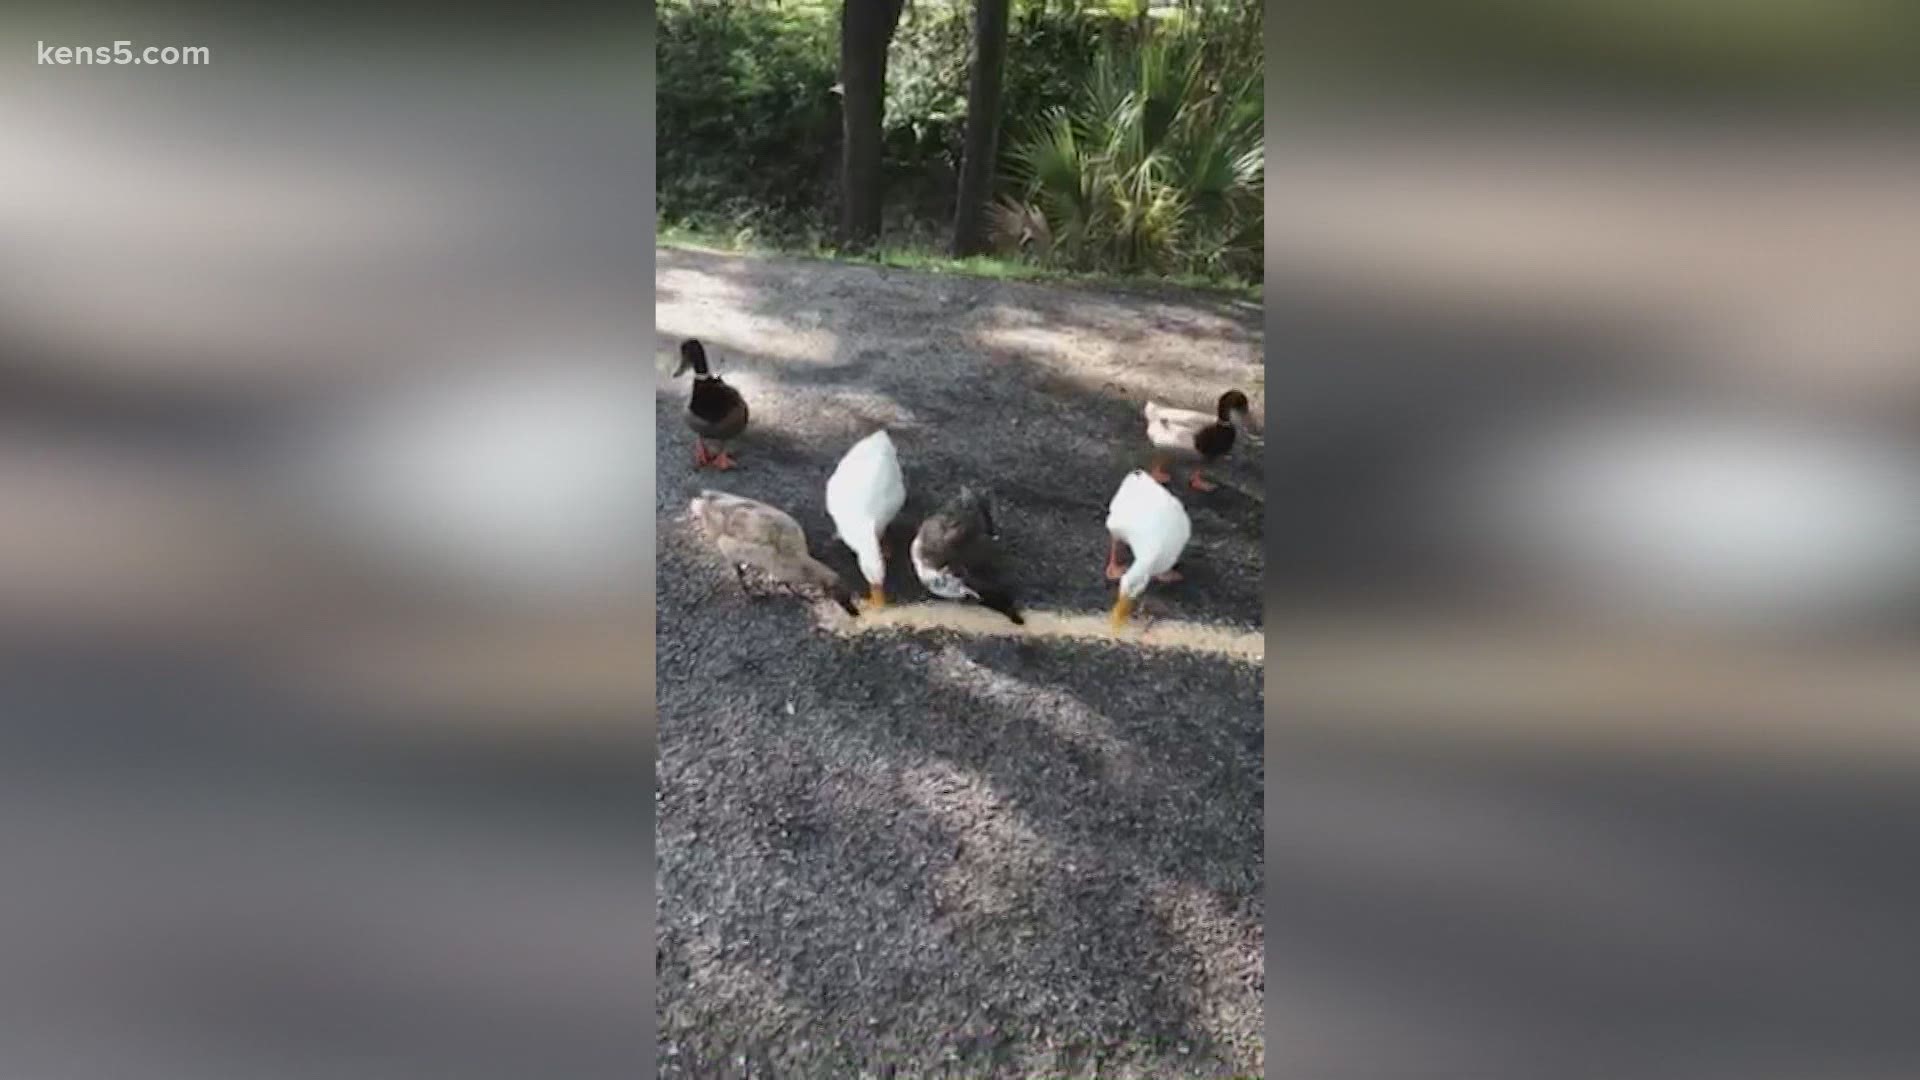 Once the ducks hear that container of corn shaking, they come running! Alex Pena says the ducks are trained to come whenever they hear the container shaking.